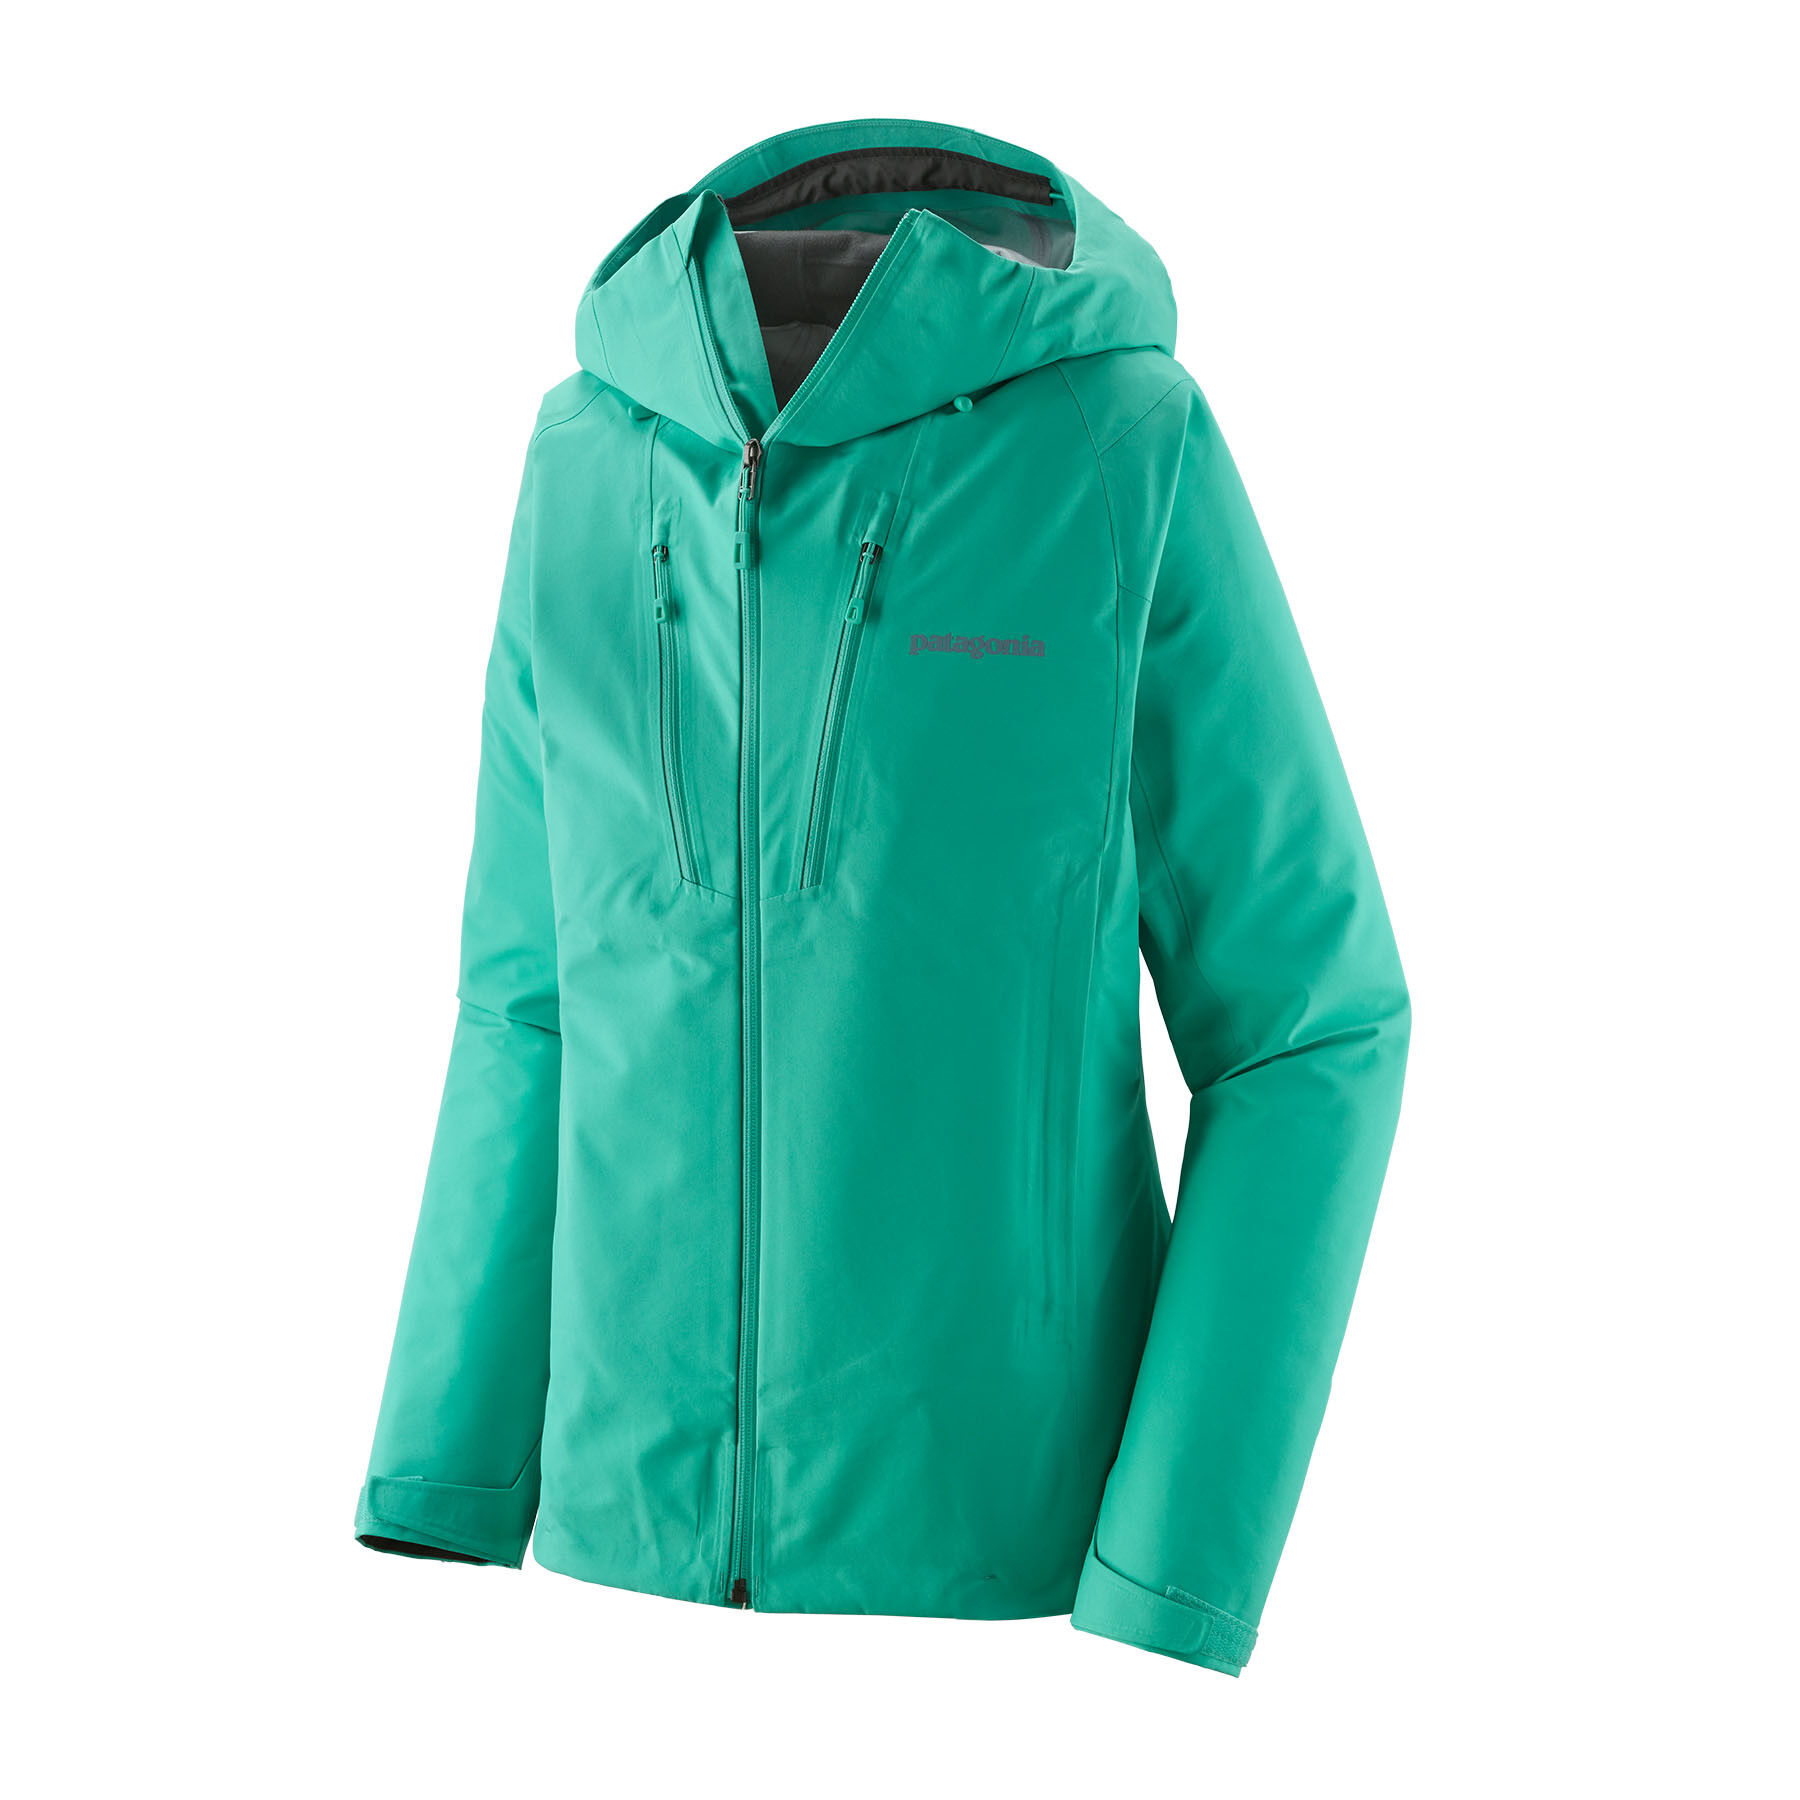 Patagonia - Triolet Jkt - Chaqueta impermeable - Mujer